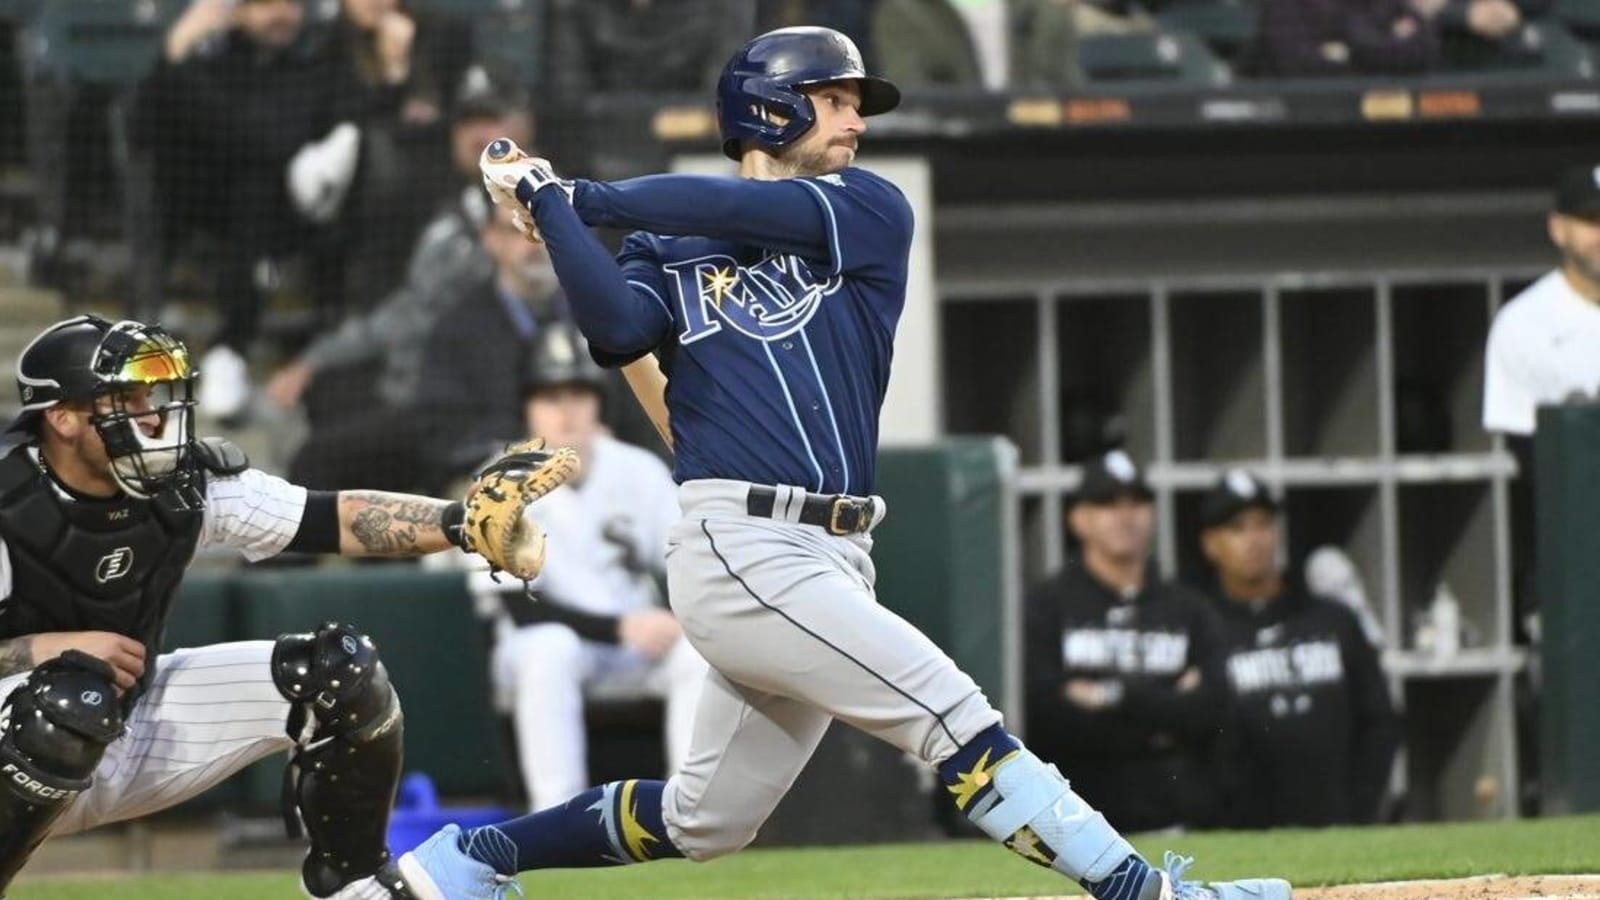 Rays hang 14 on White Sox, who drop eighth straight